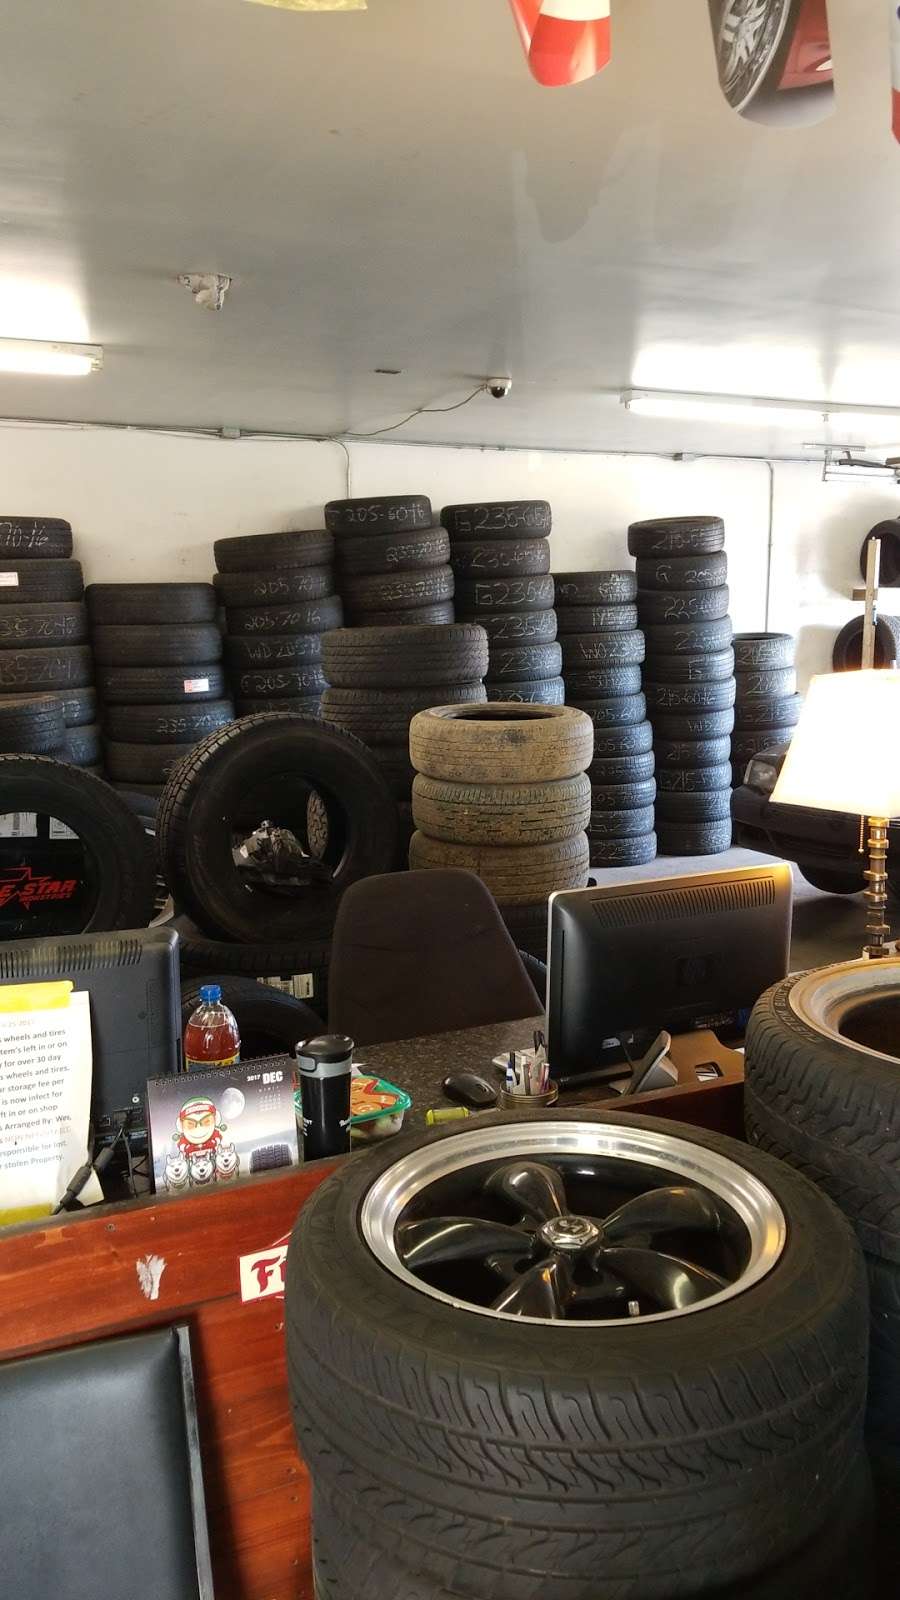 Wess Wheels & Tires | 6225 Kennedy Ave, Hammond, IN 46323, USA | Phone: (219) 513-9391